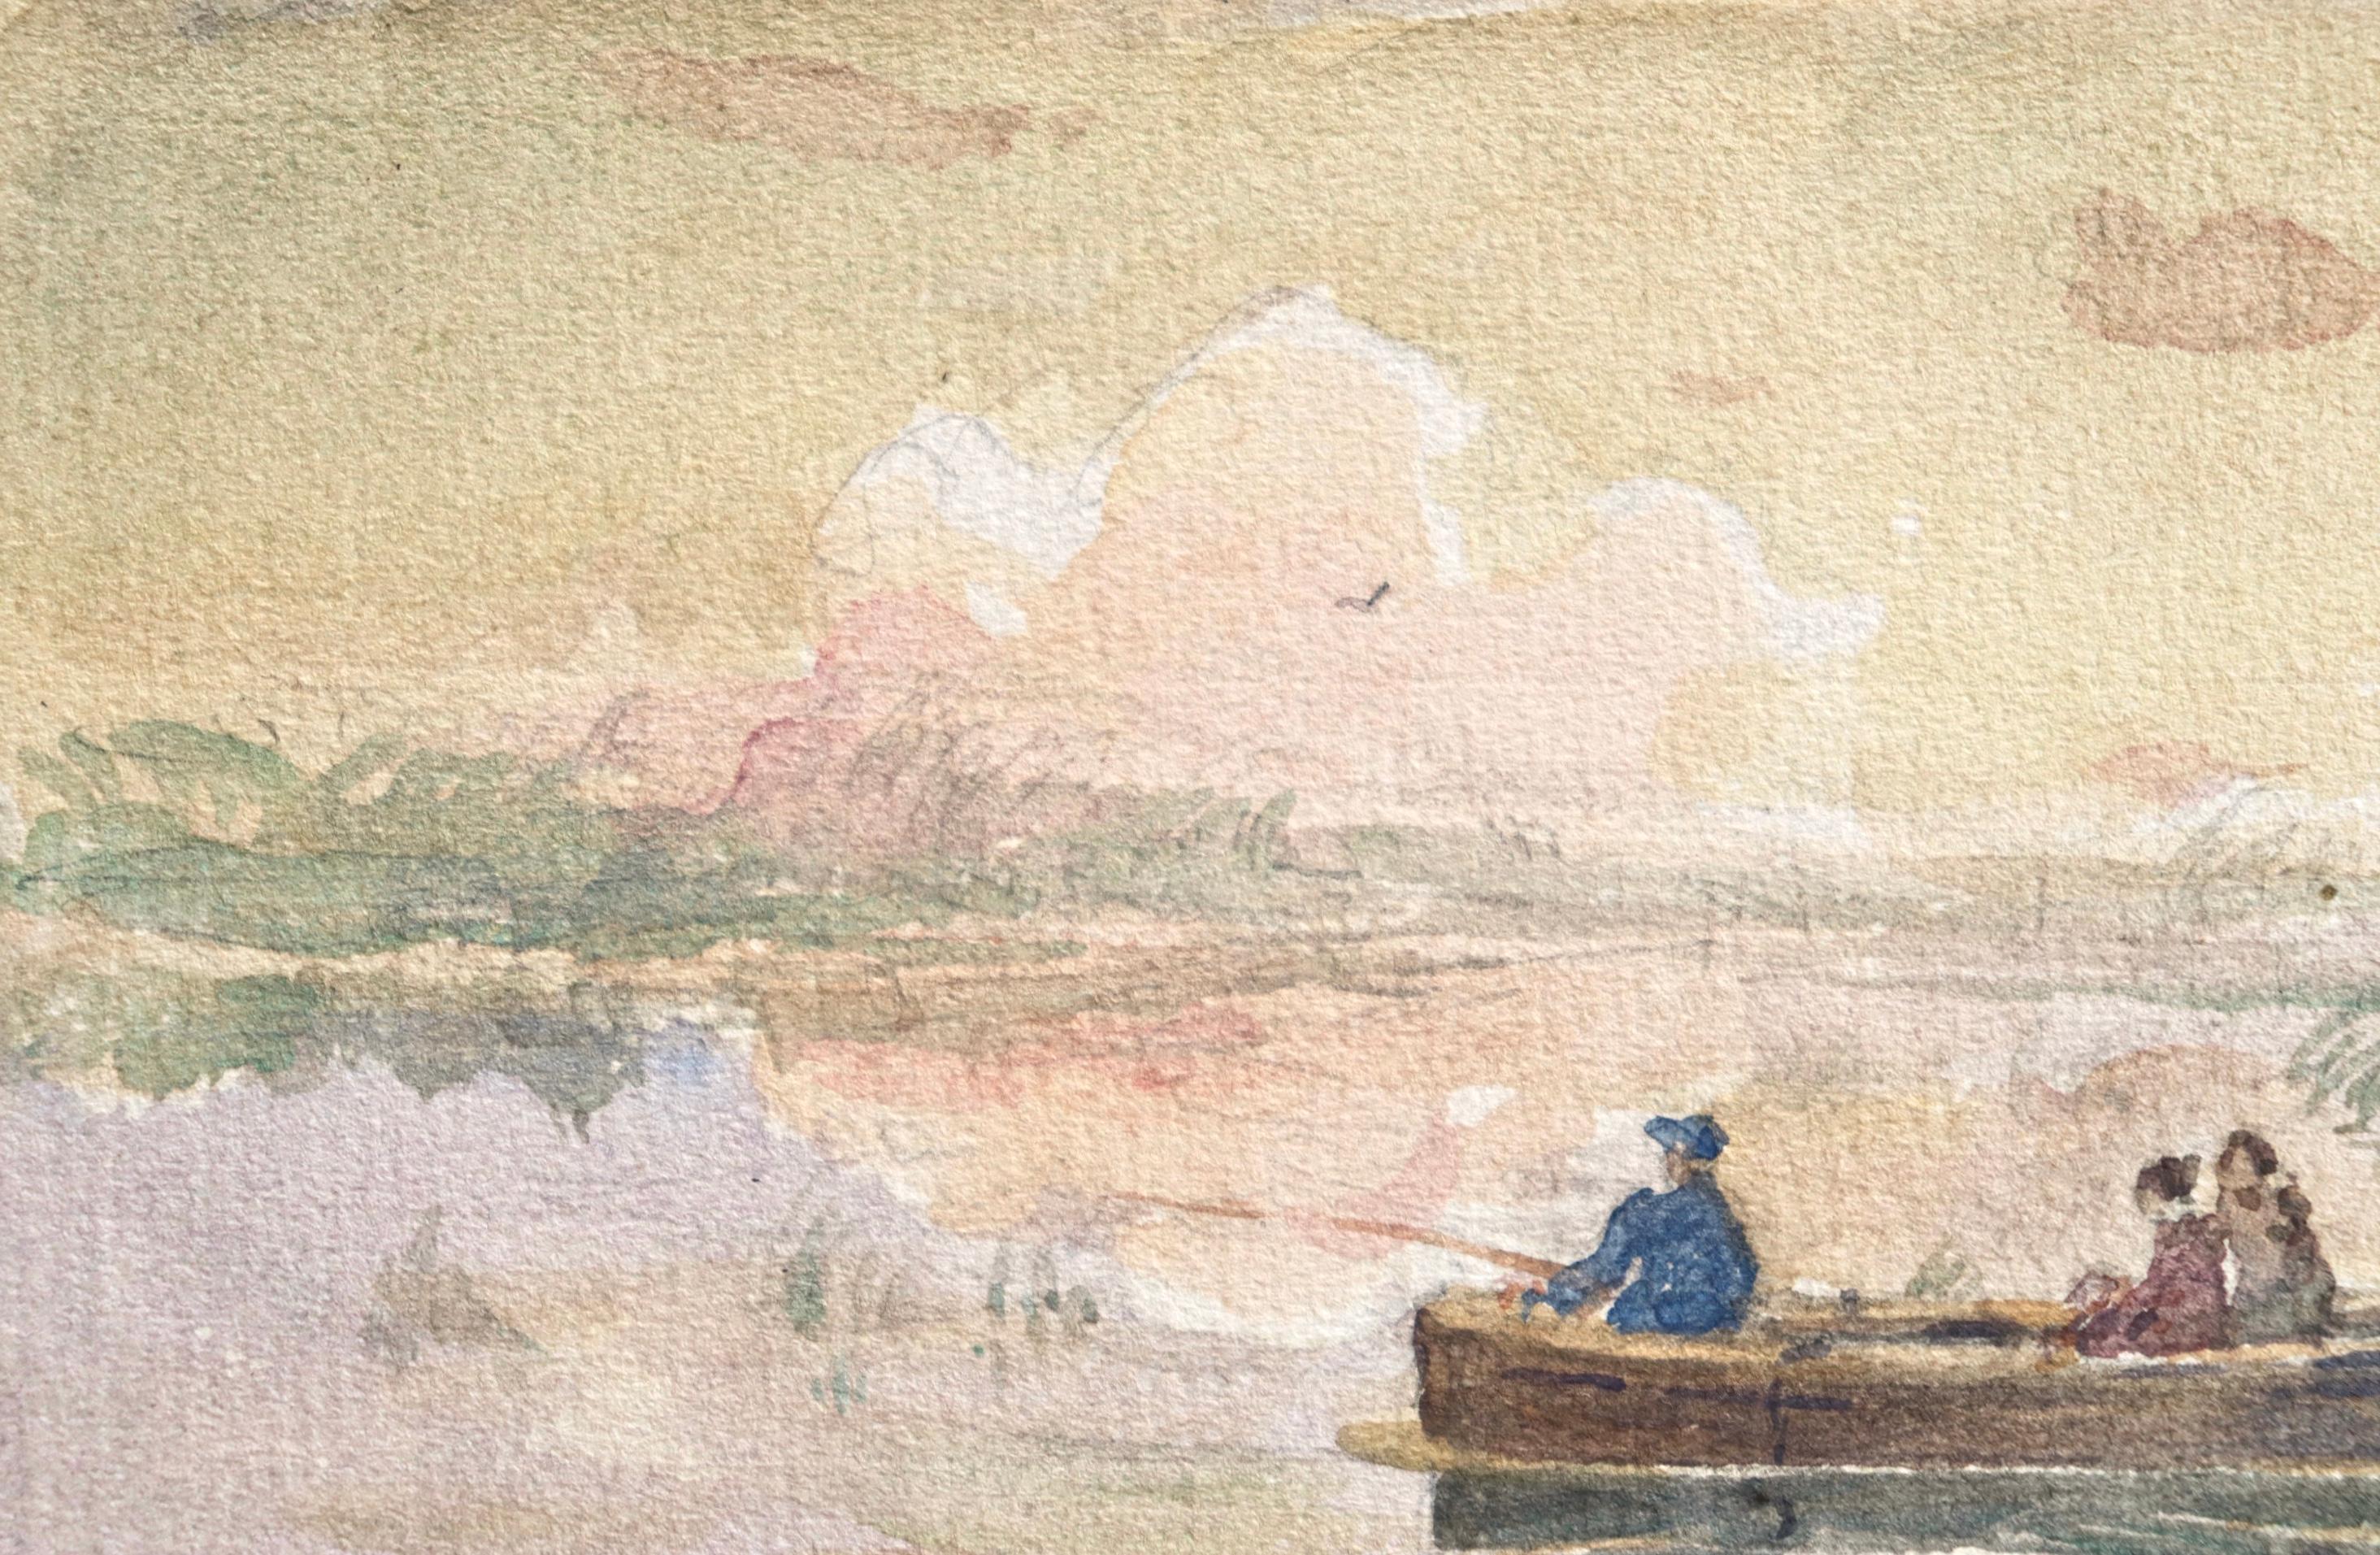 Watercolour on paper circa 1910 but French Impressionist painter Henri Duhem depicting figures in a boat with one holding a fishing rod. The light is low and the clouds are reflecting in the water. Signed lower left. This piece is not currently